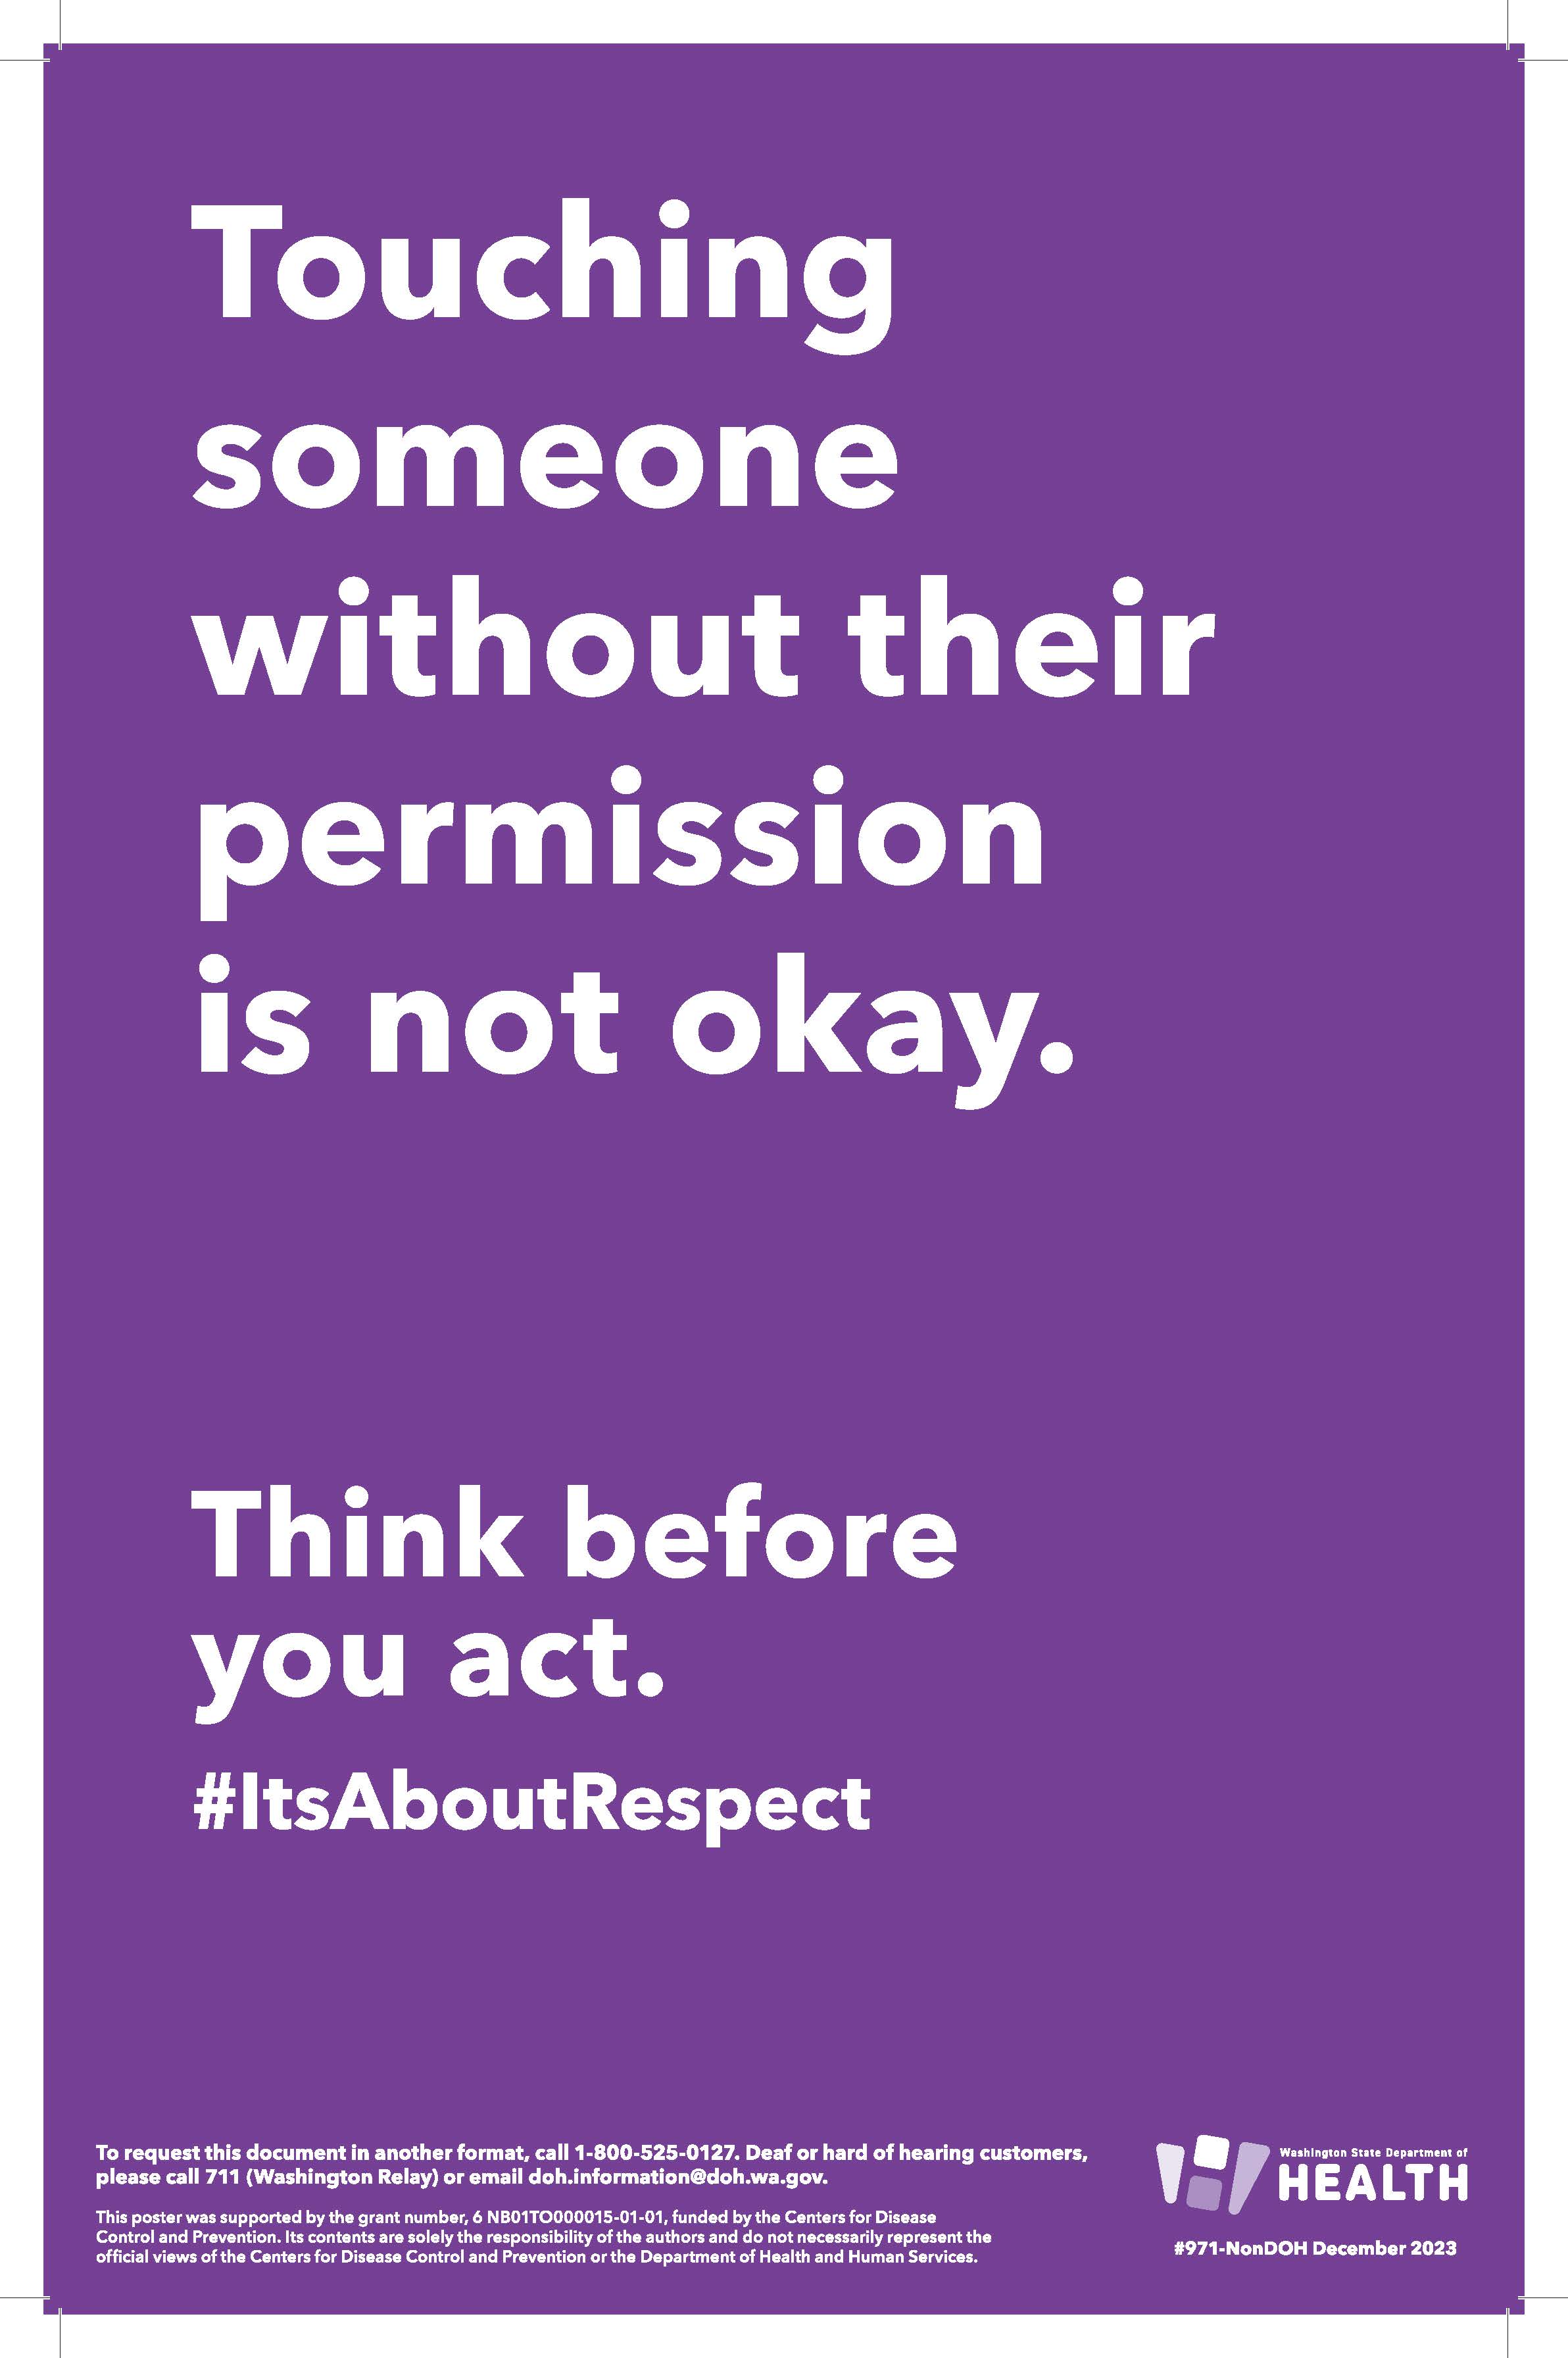 This poster image says “Touching someone without permission is way beyond not cool. Think before you act.” It features a cat in a plumed hat and the hashtag “it's about respect”.